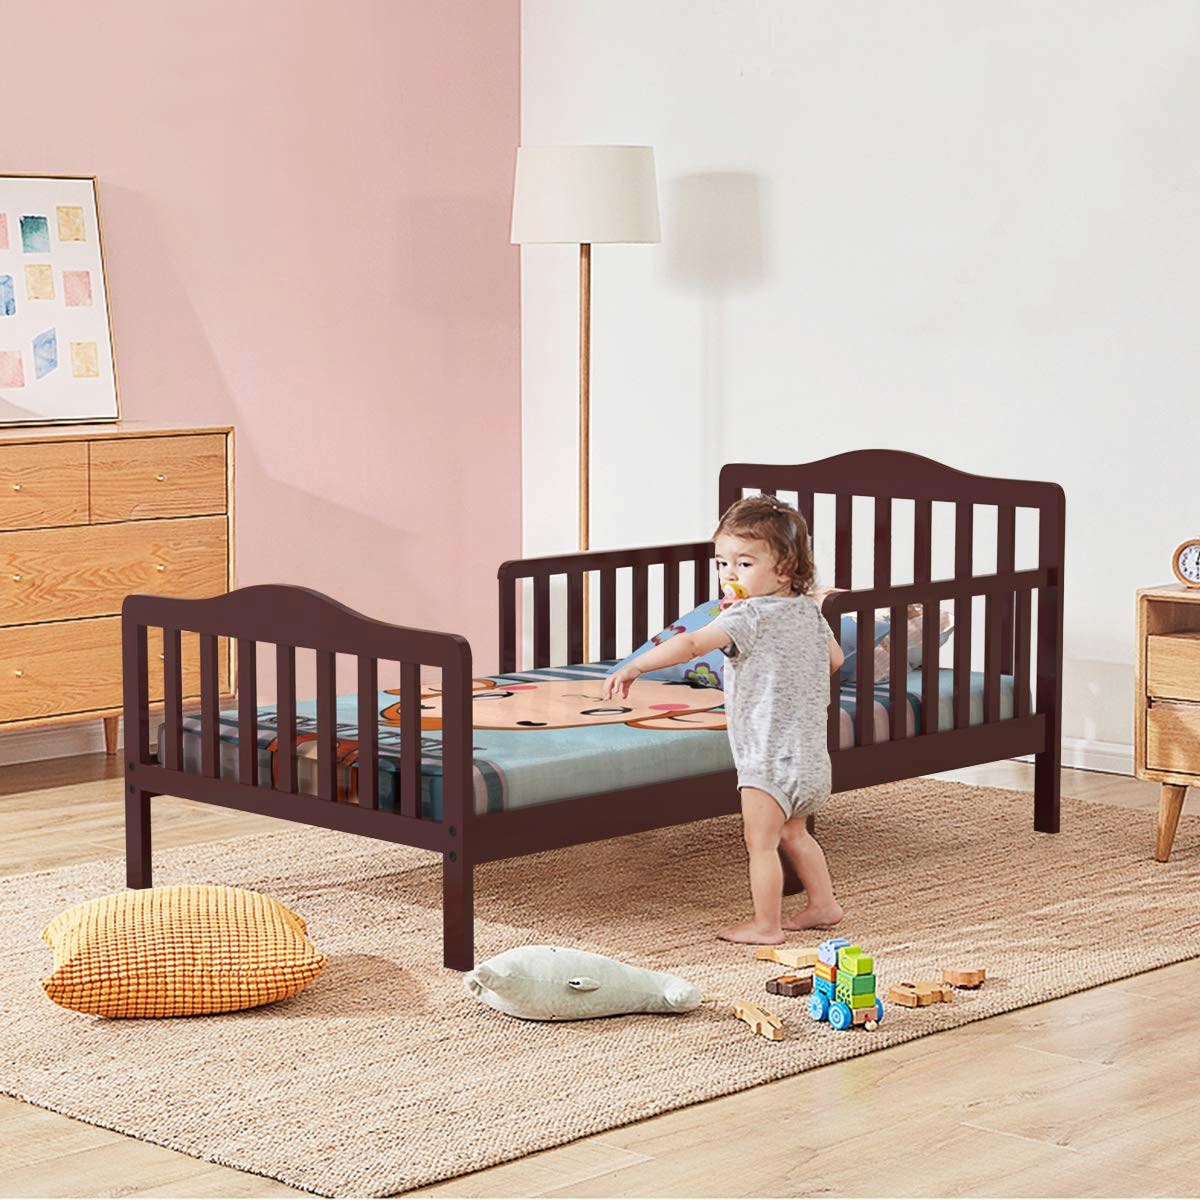 Ktaxon Baby Toddler Bed Solid Wood Bedroom Furniture with Safety Rails ...